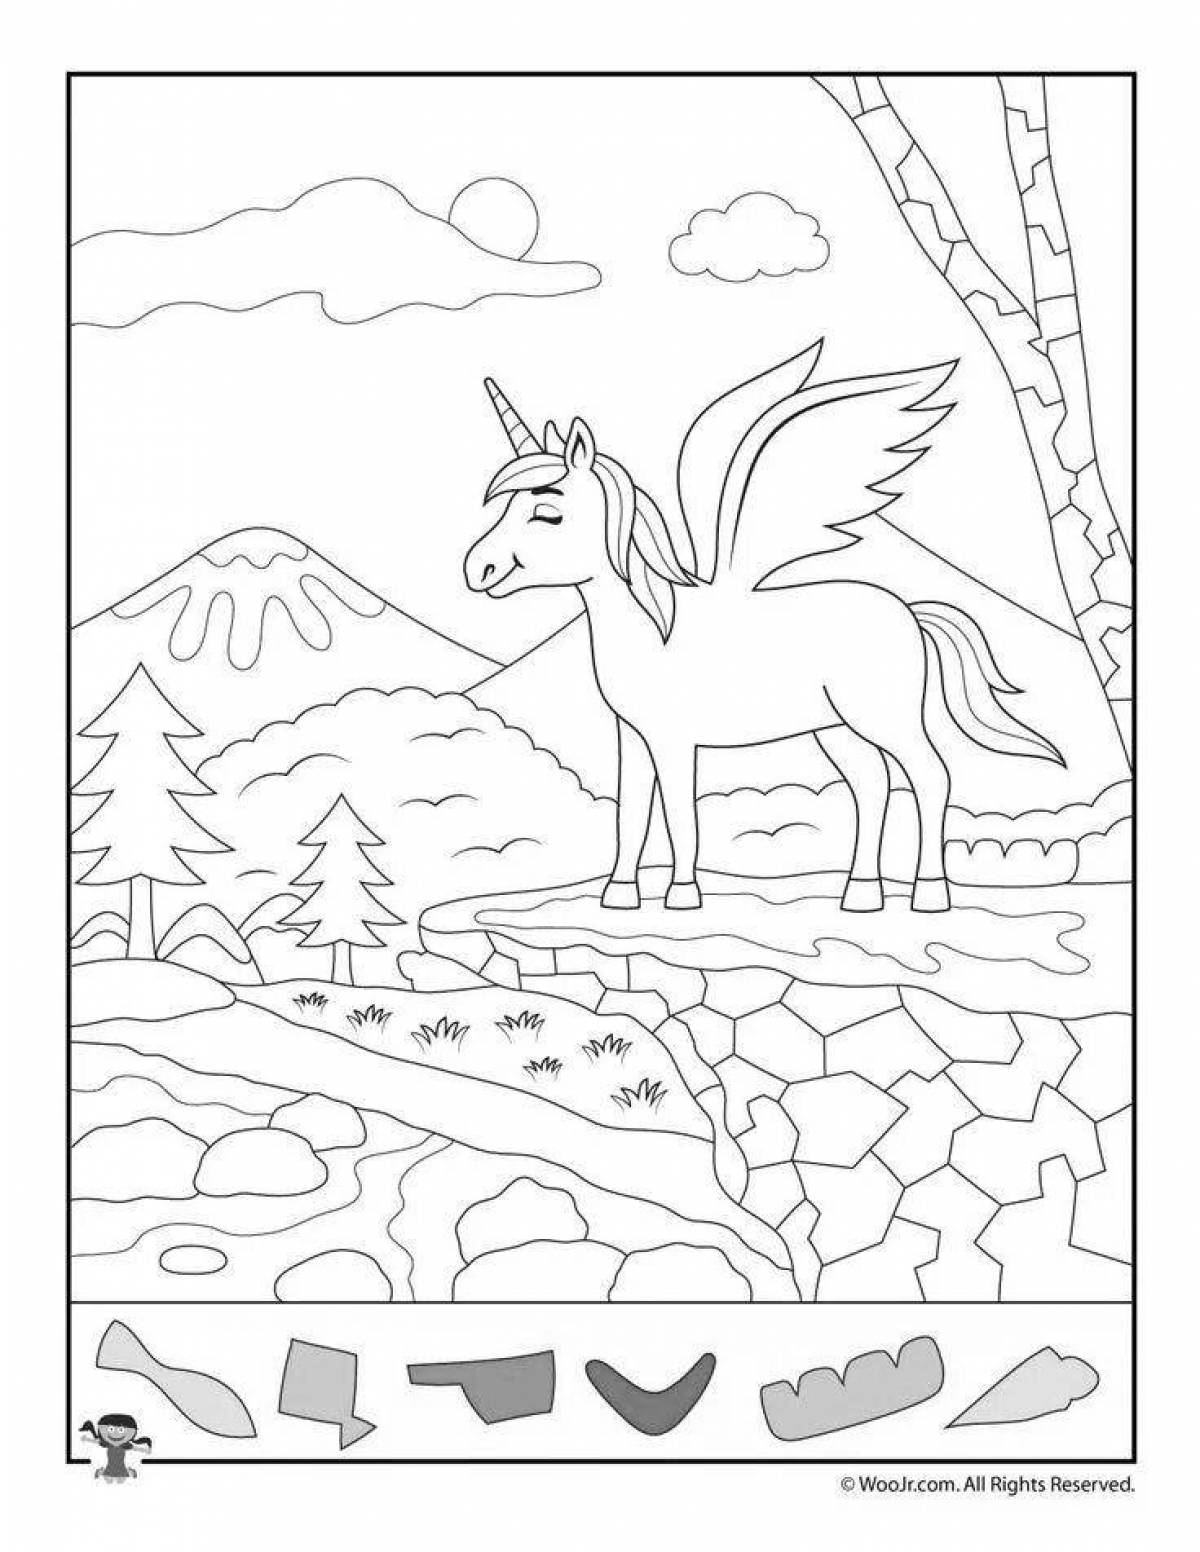 Mystical unicorn coloring by numbers